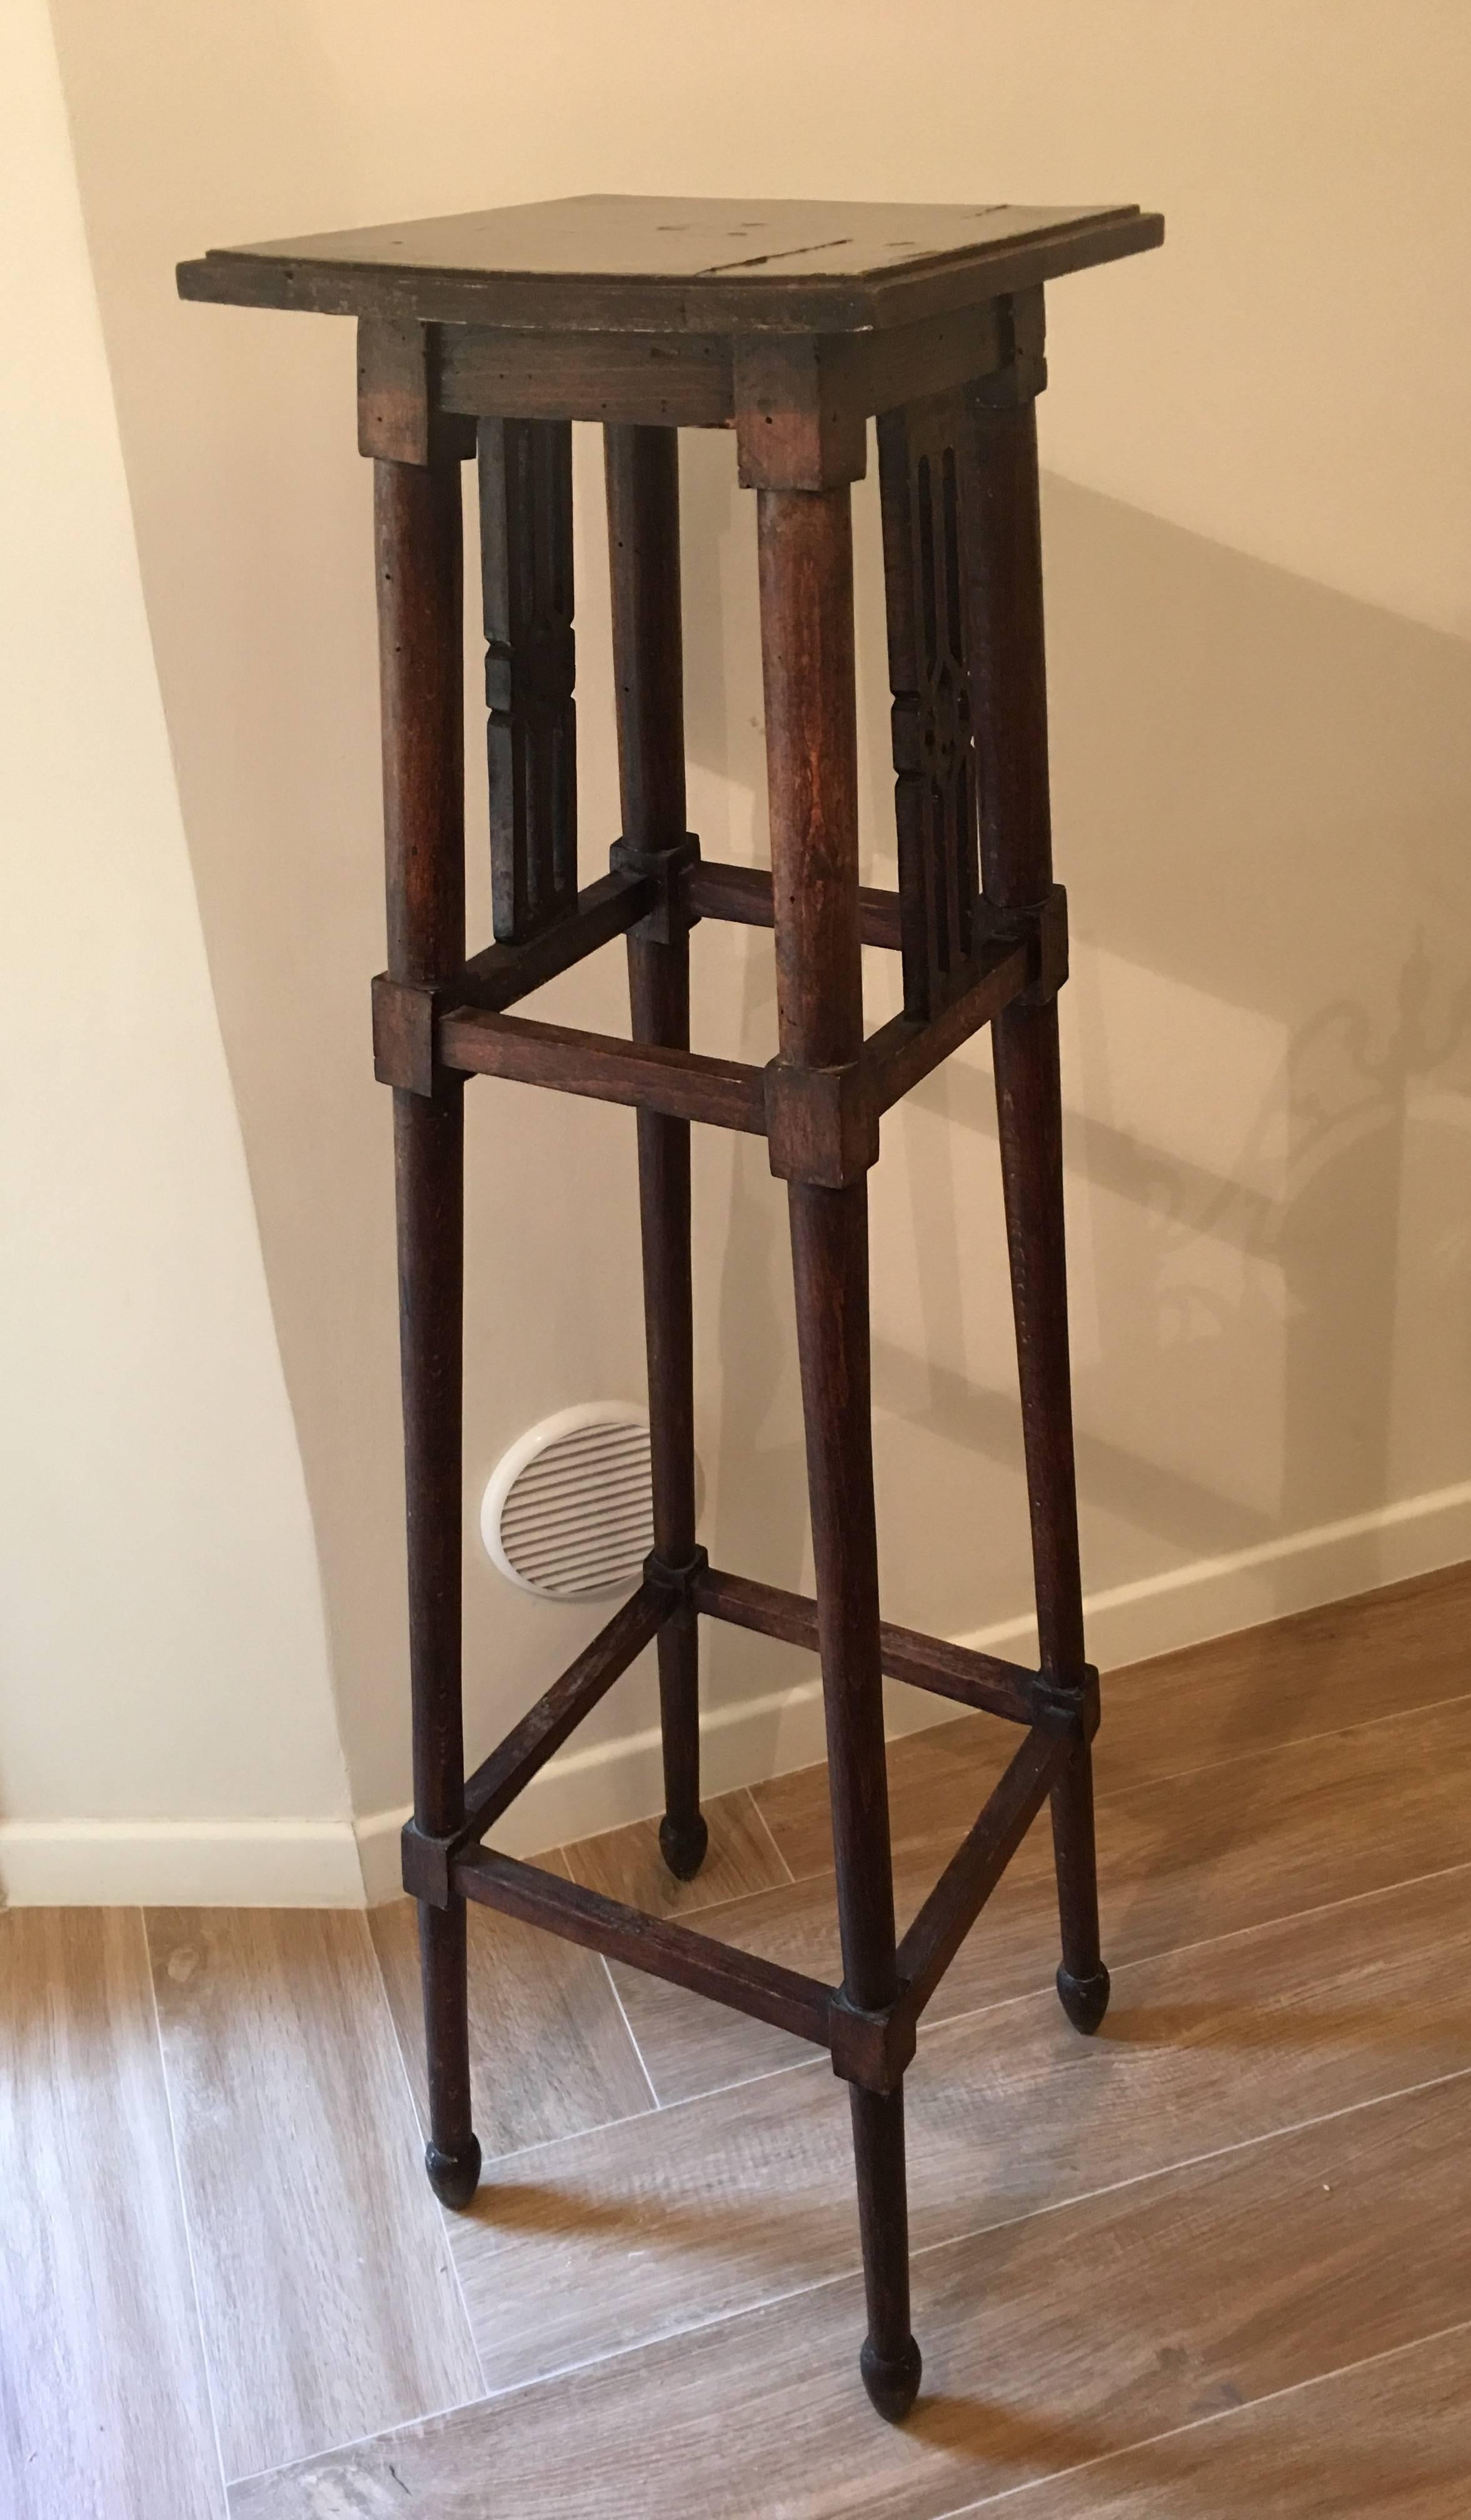 Beautiful, not resaturated, in its authentic condition! A Liberty (Art Nouveau) period walnut pedestal stand / column.

Measure: 29/28 cm is the top dimension.

INTERNATIONAL SHIPPING
Our transportation of antique furniture and items is executed